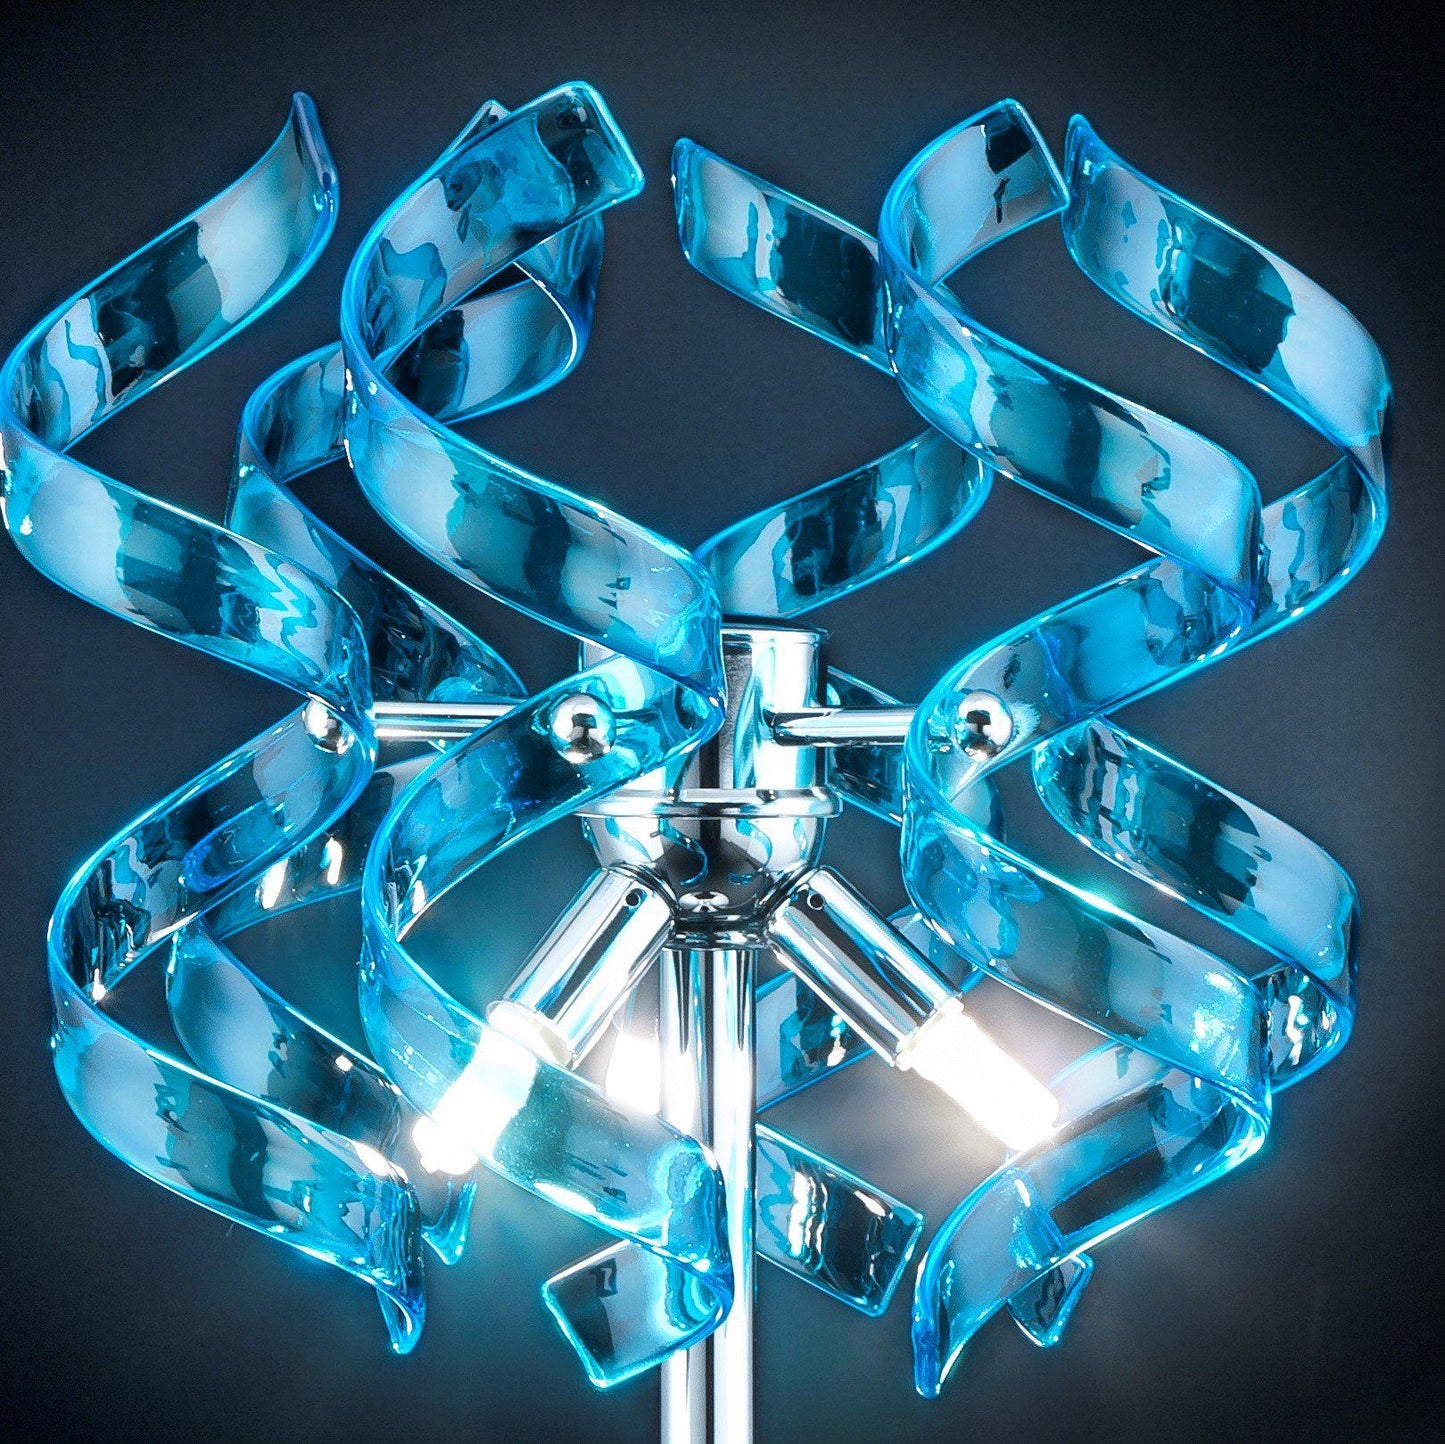 Abstract Glass Ribbon Circular Floor Standing Light with 3 Centre Cluster Lamps 40cm diameter-Chrome-Turquoise-Distinct Designs (London) Ltd